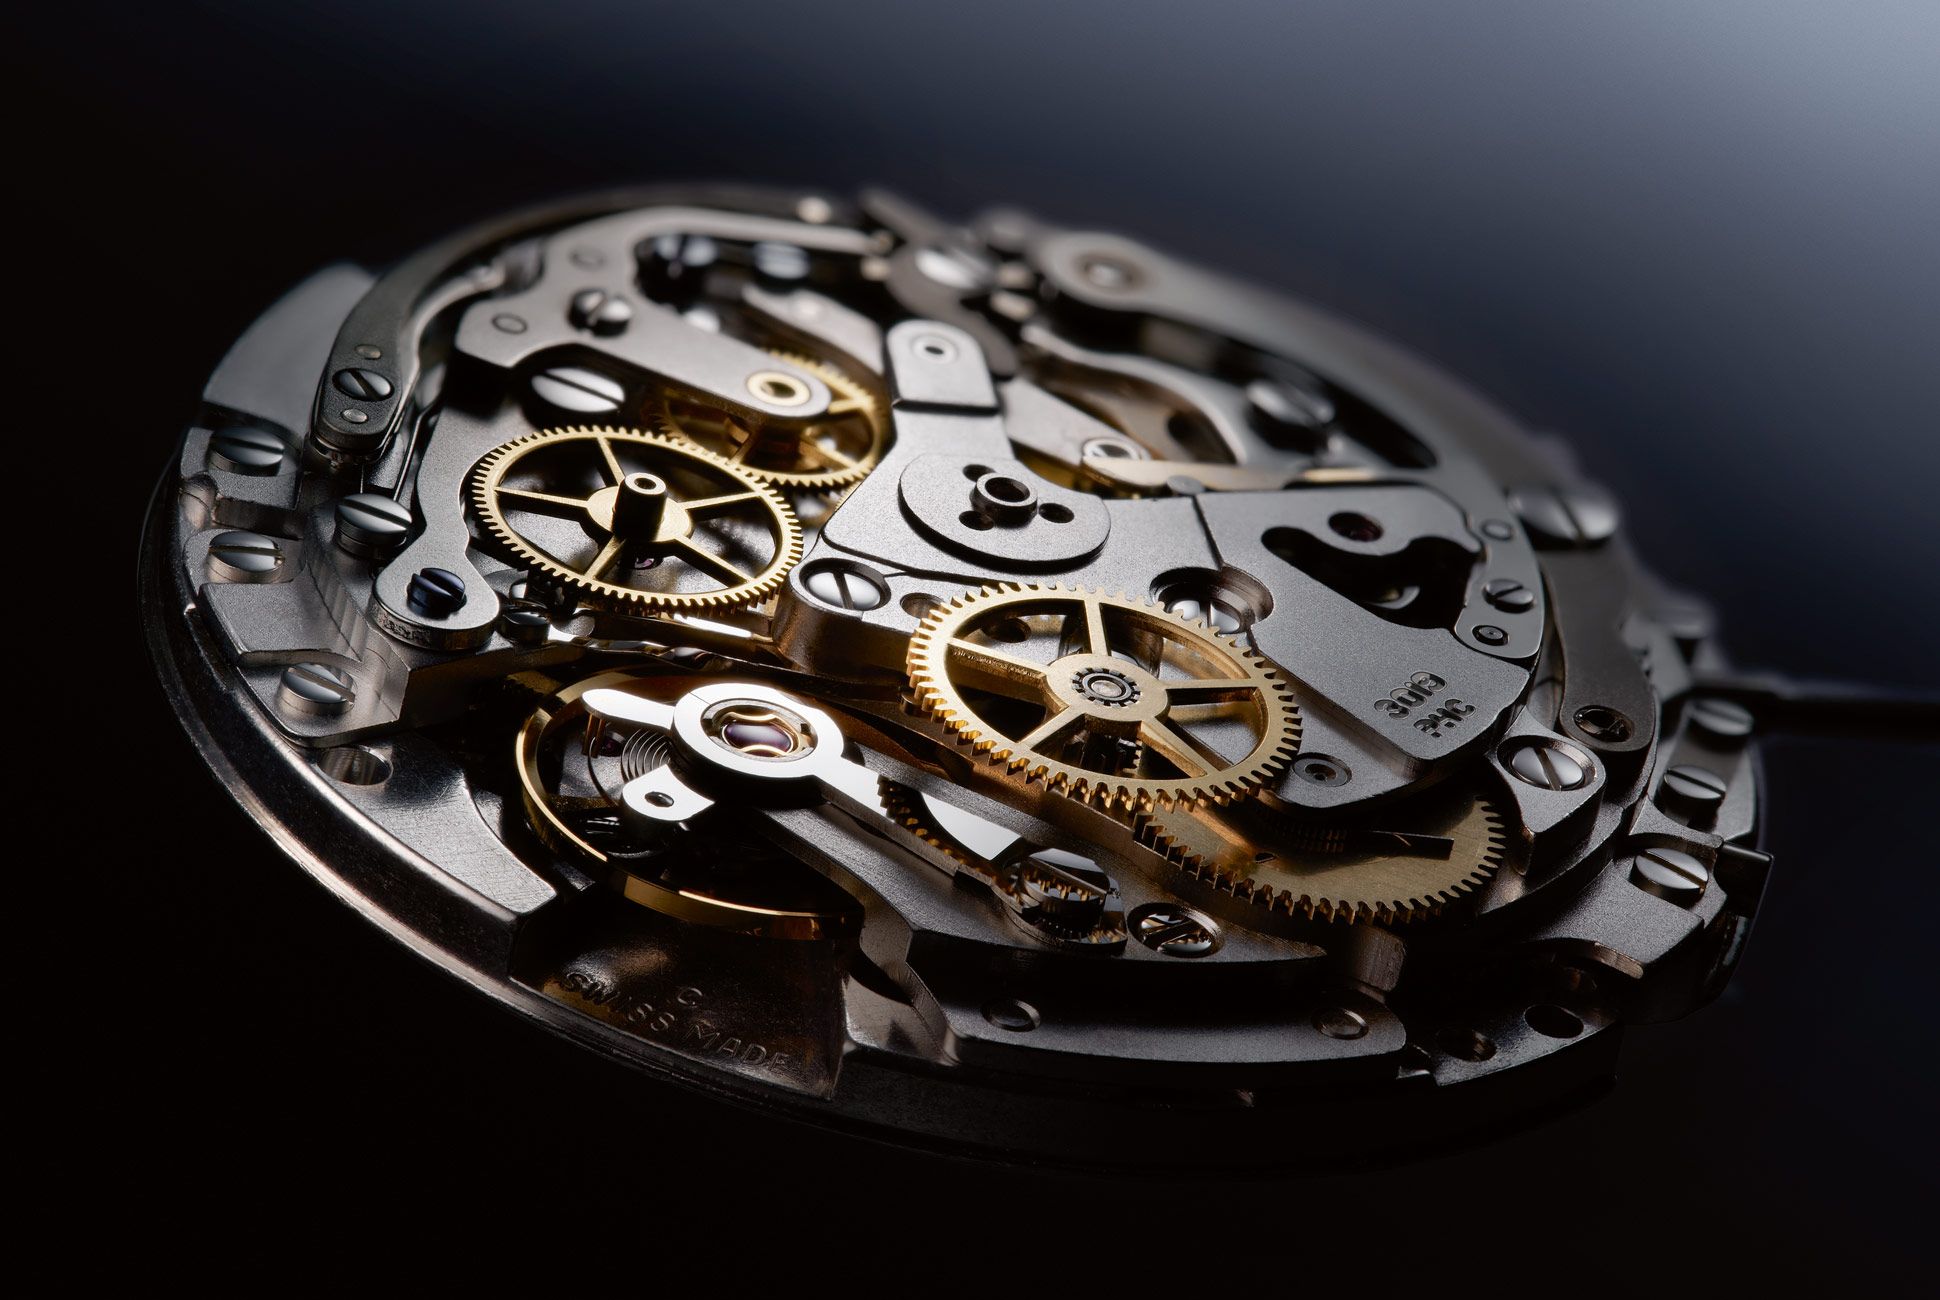 A New Regulator from Zenith Could Change Watchmaking for the Better